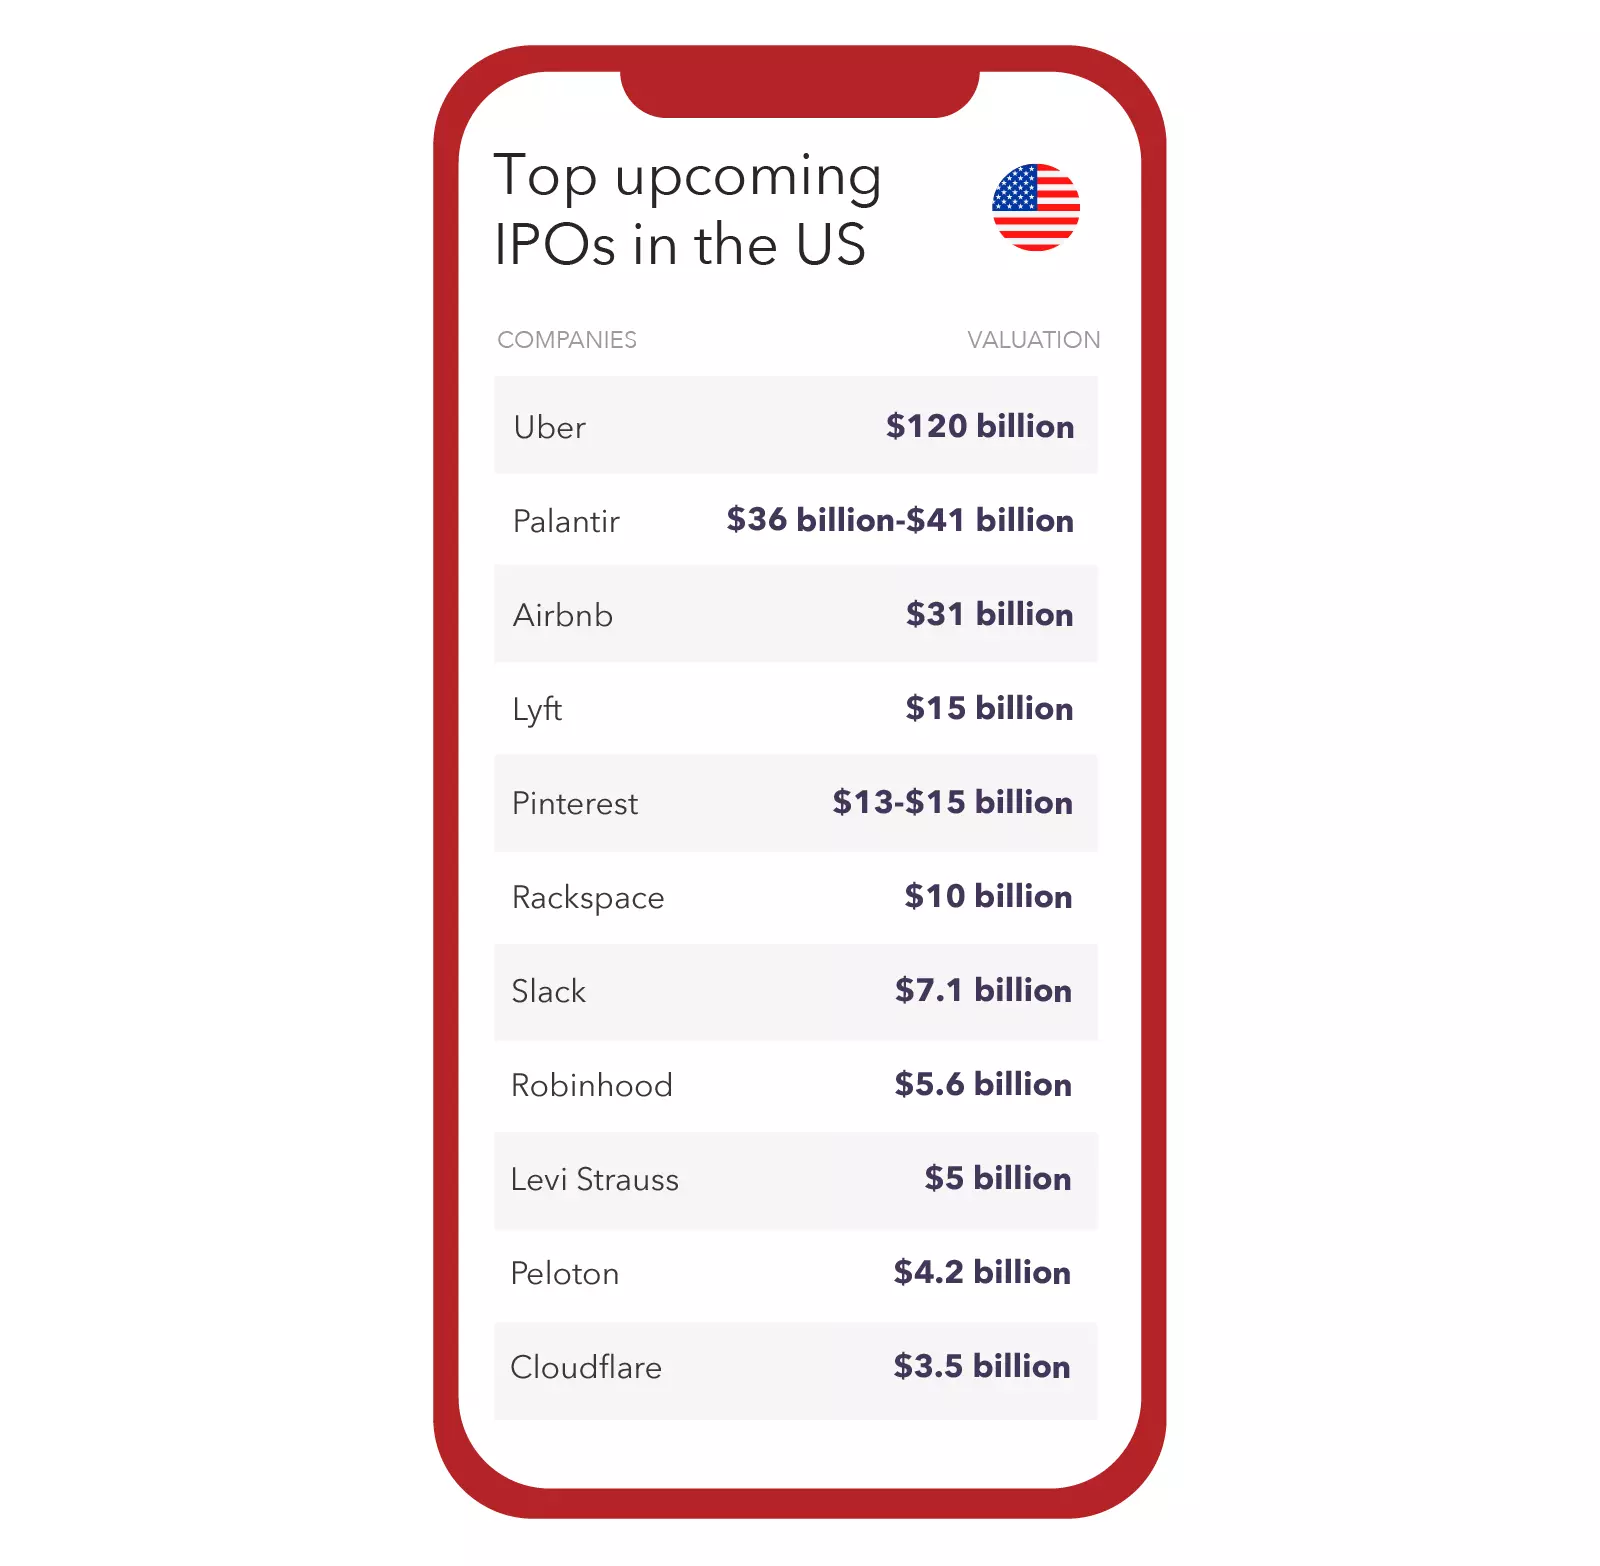 Top upcoming IPOs in the US 2019